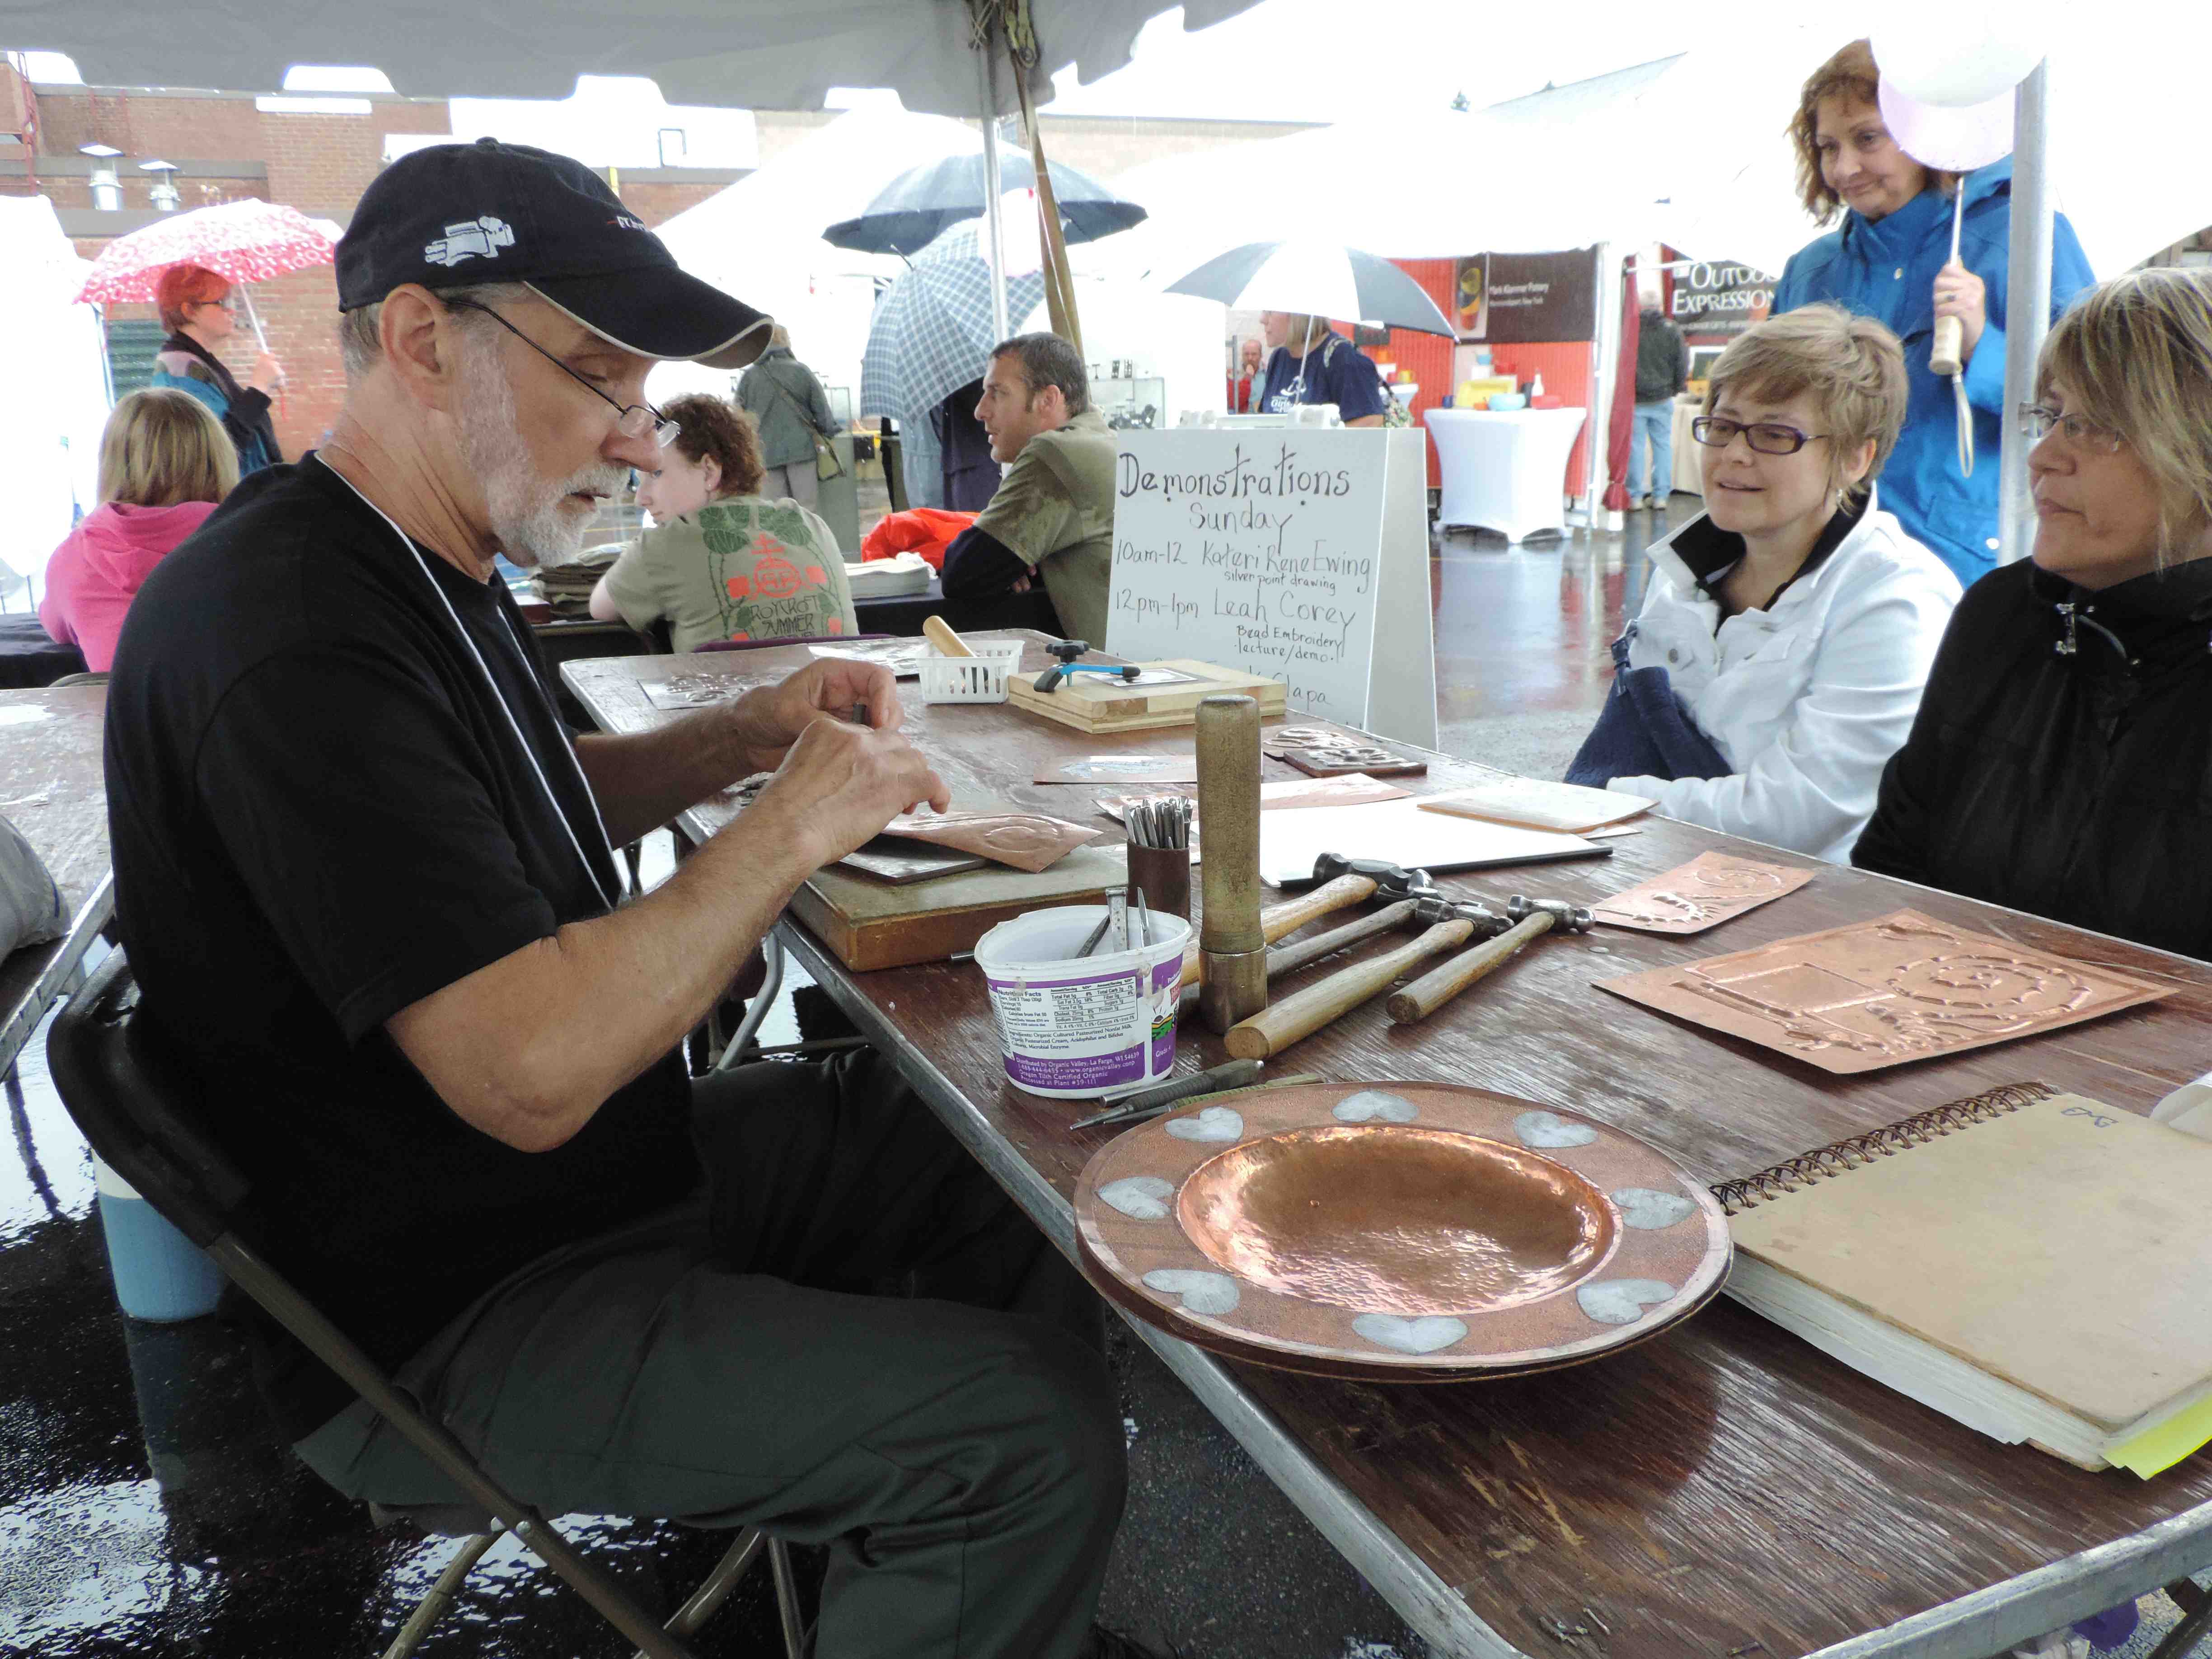 40th annual Summer Festival to feature demonstrations by Roycroft Artisans